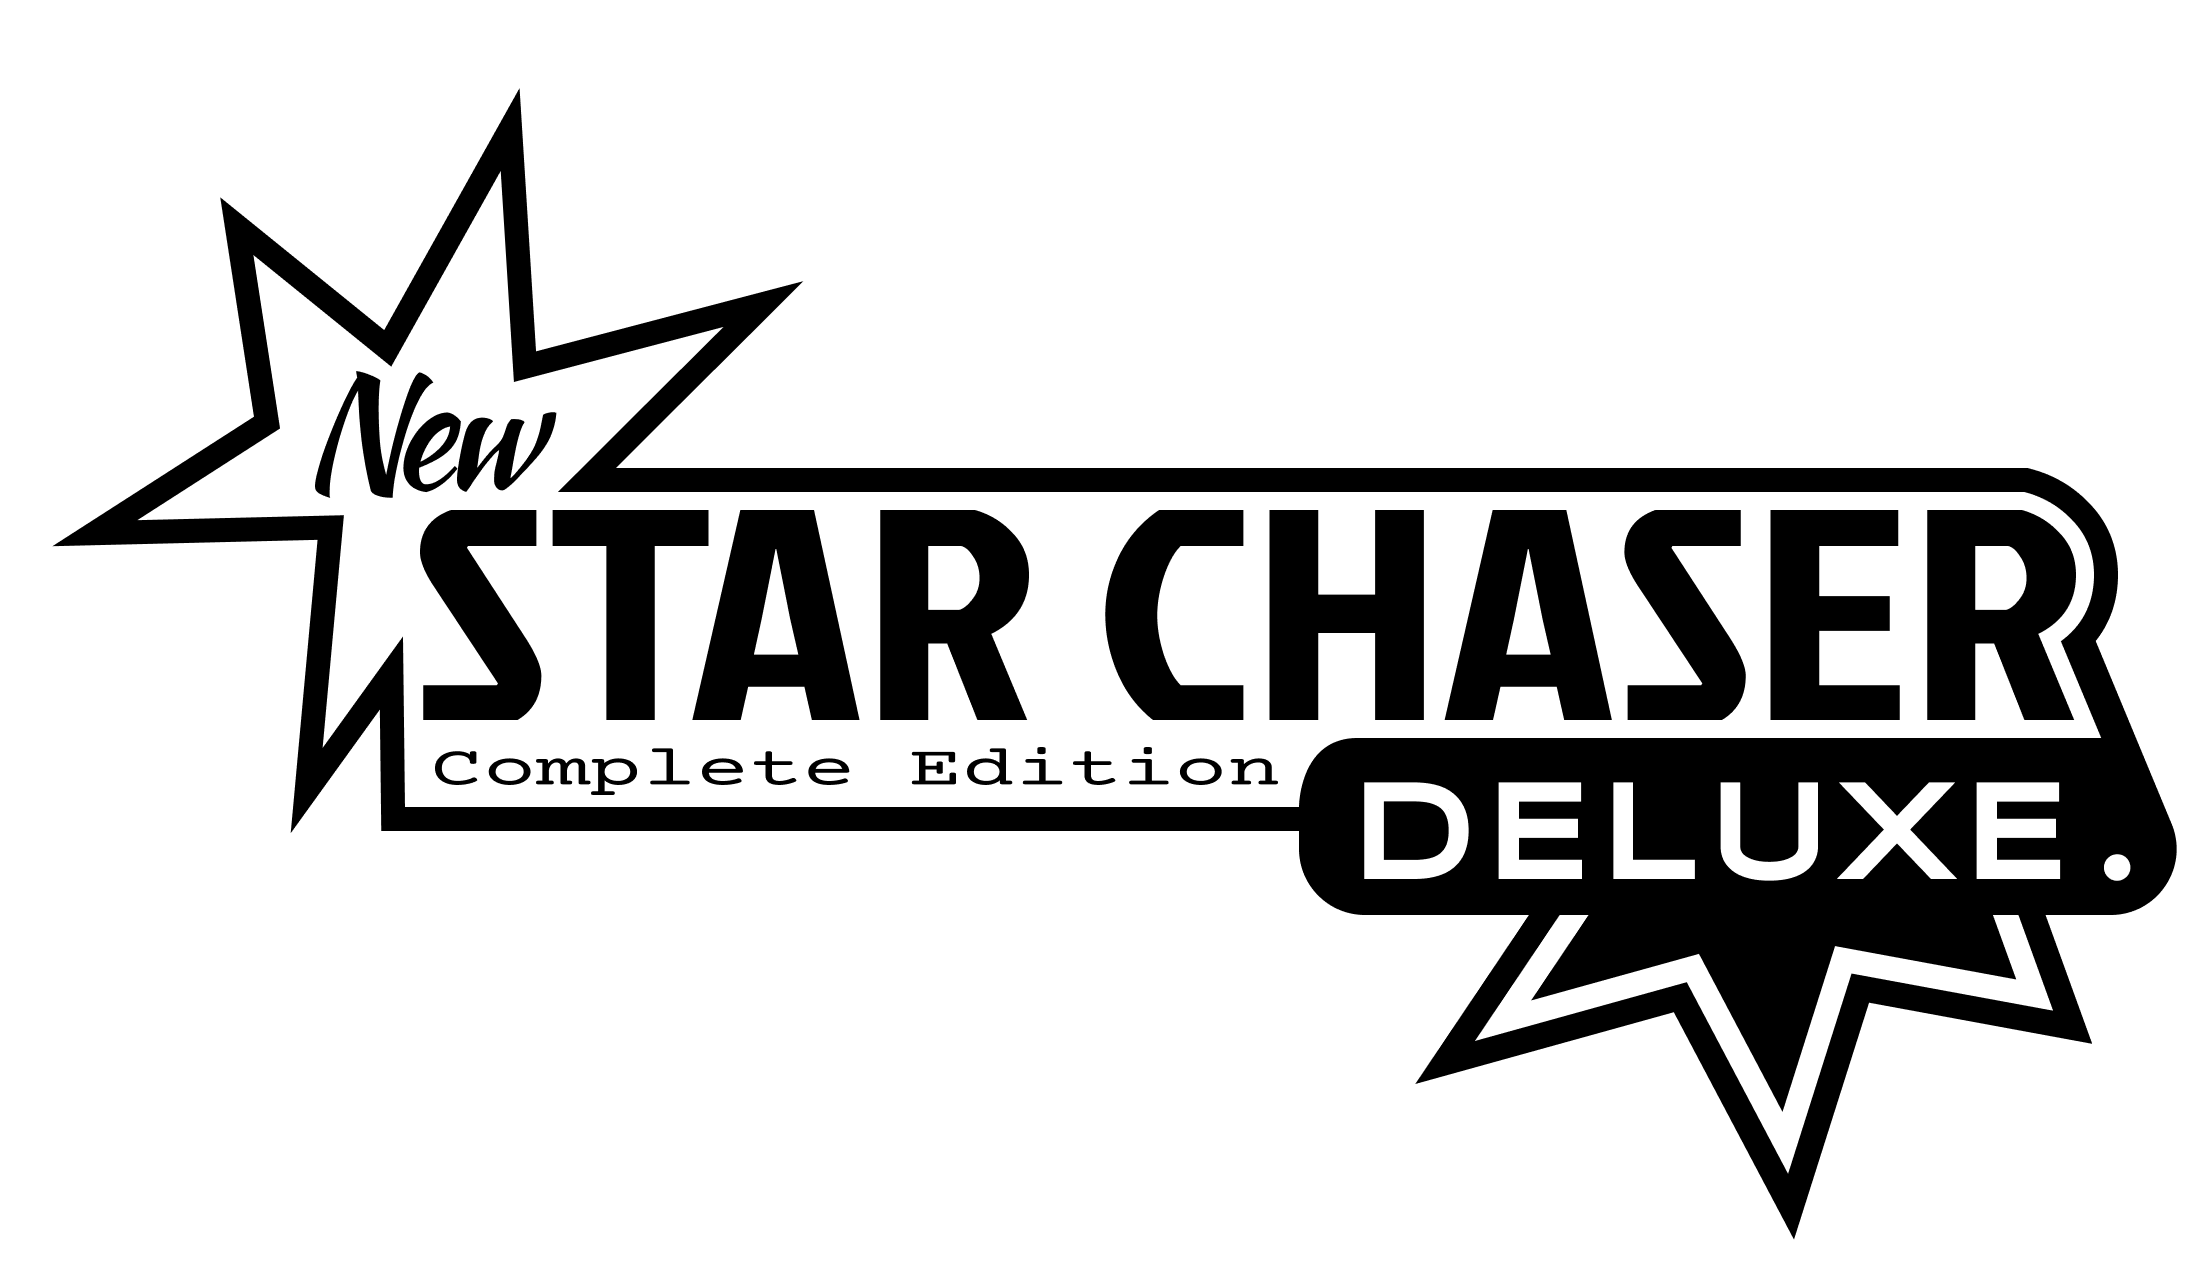 New Star Chaser Deluxe Complete Edition